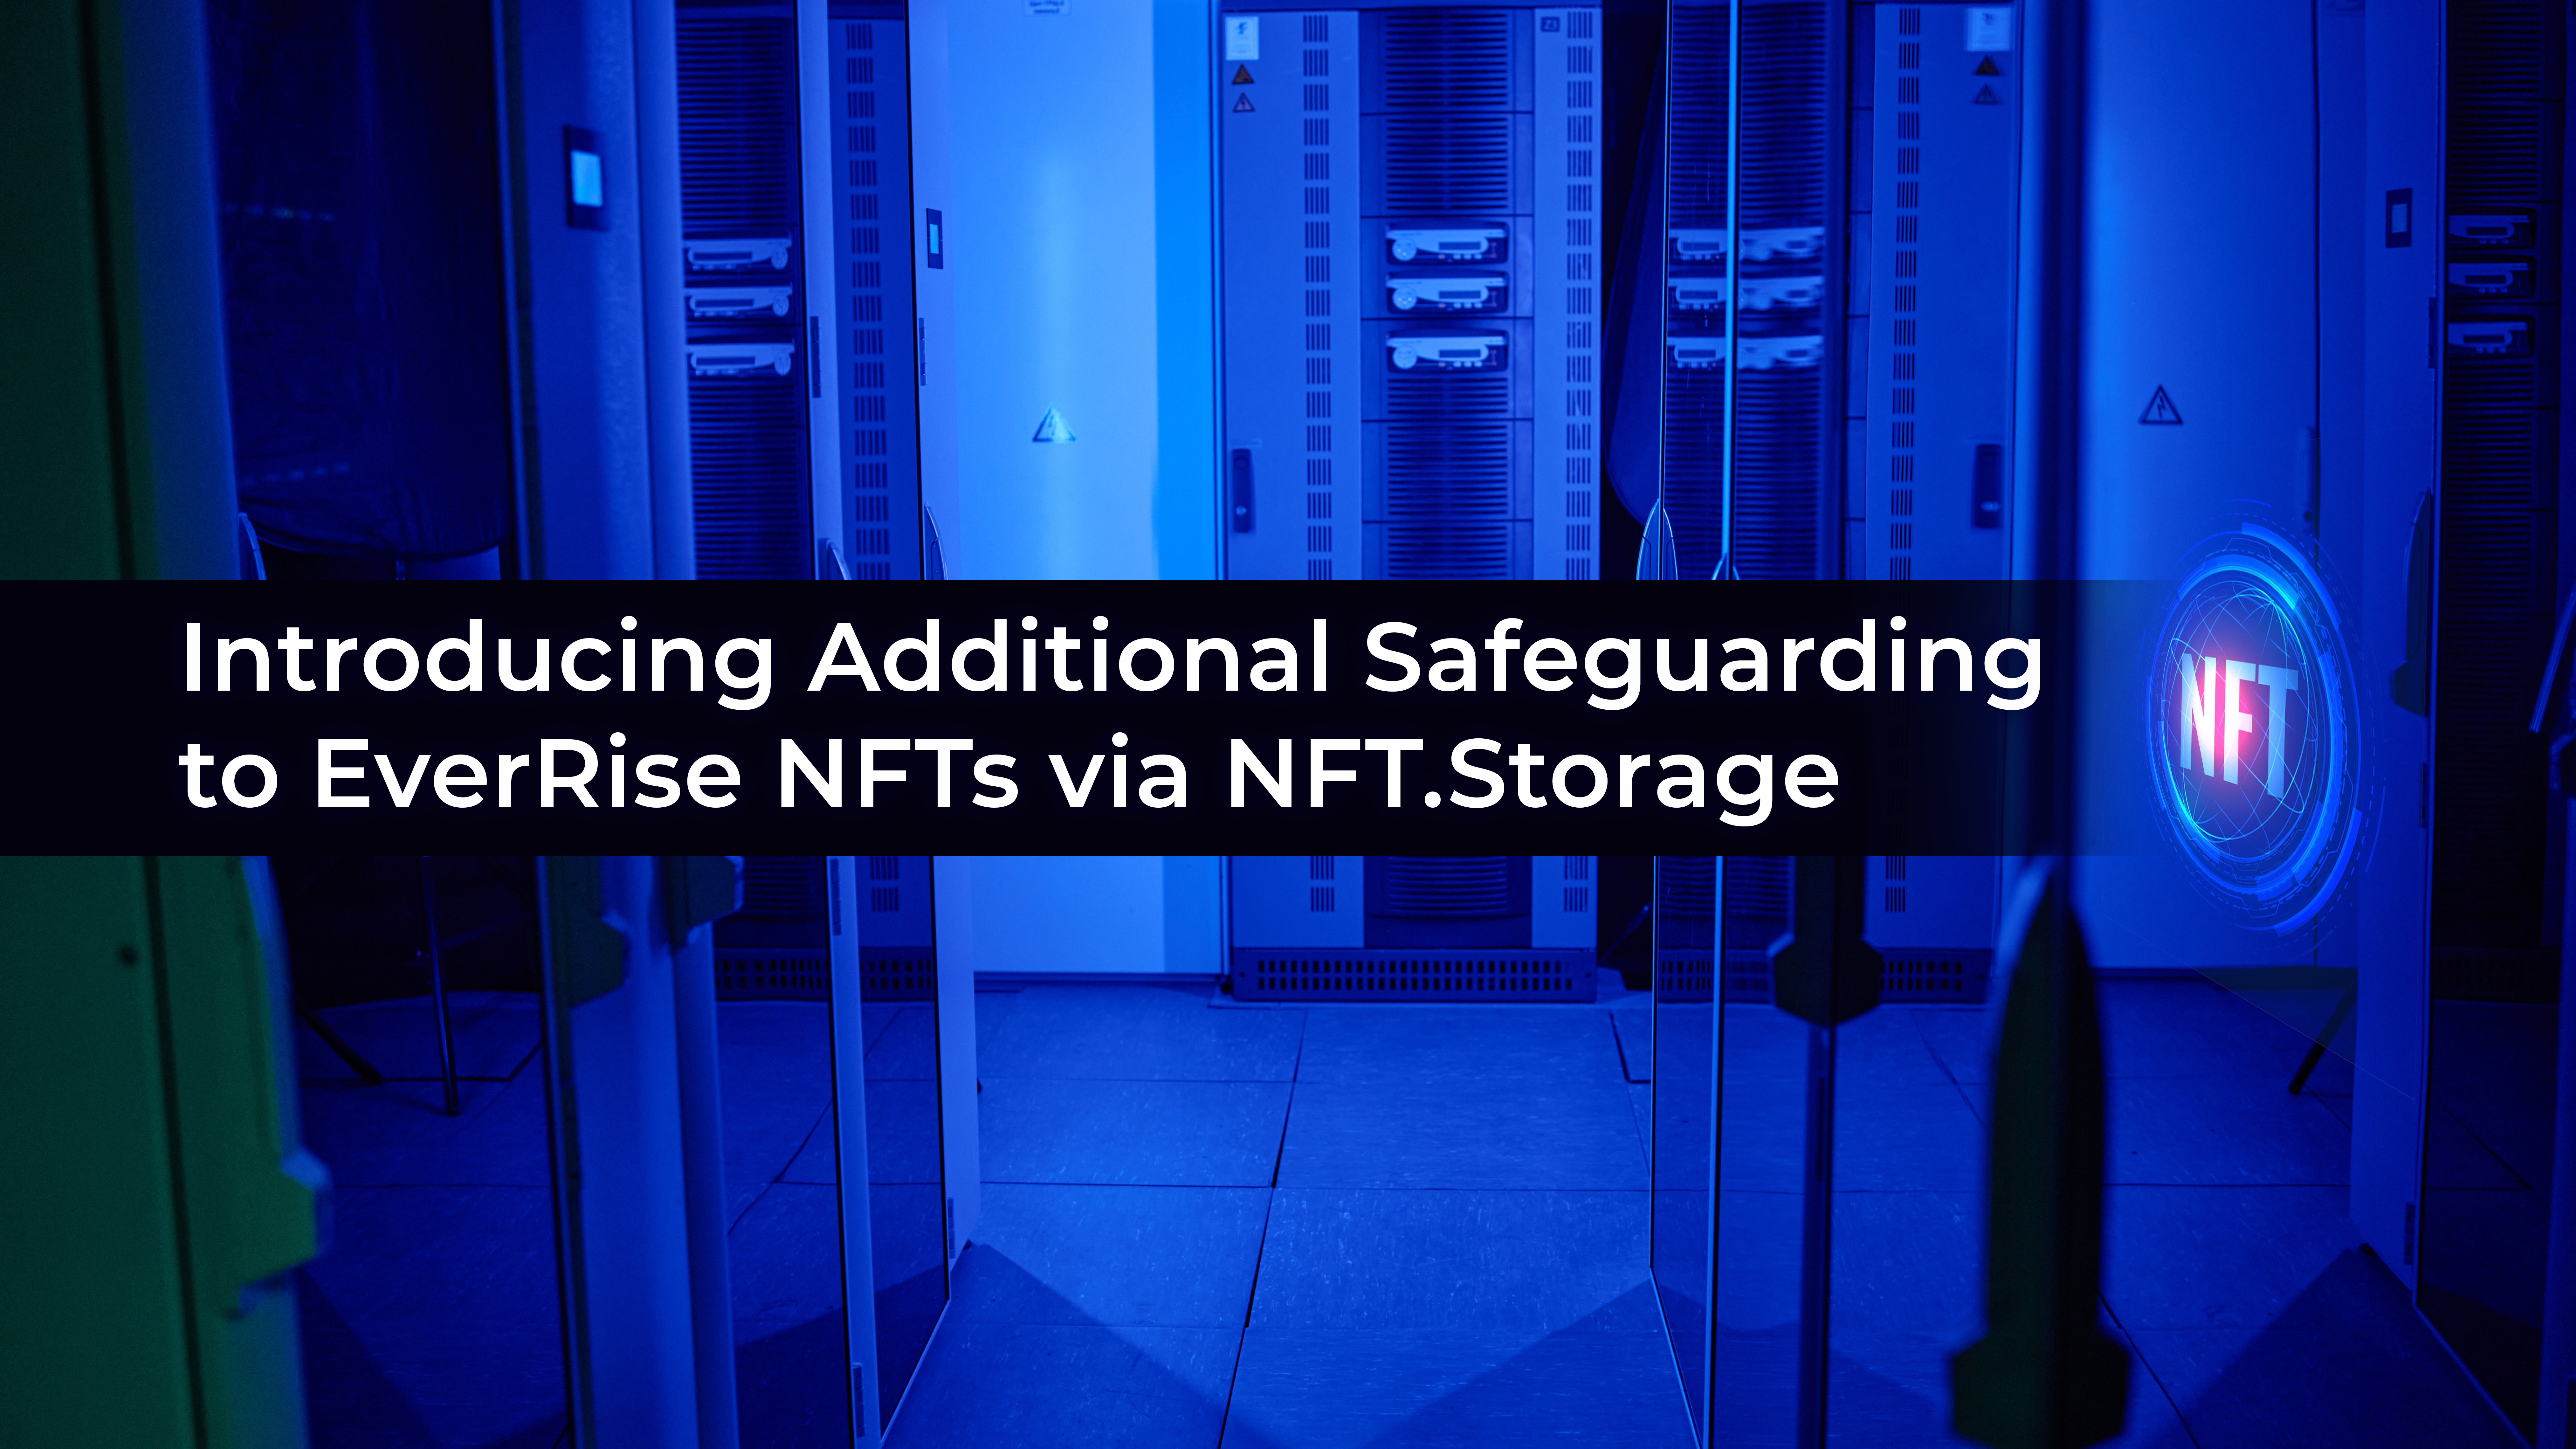 Introducing Additional Safeguarding to EverRise NFTs via NFT.Storage